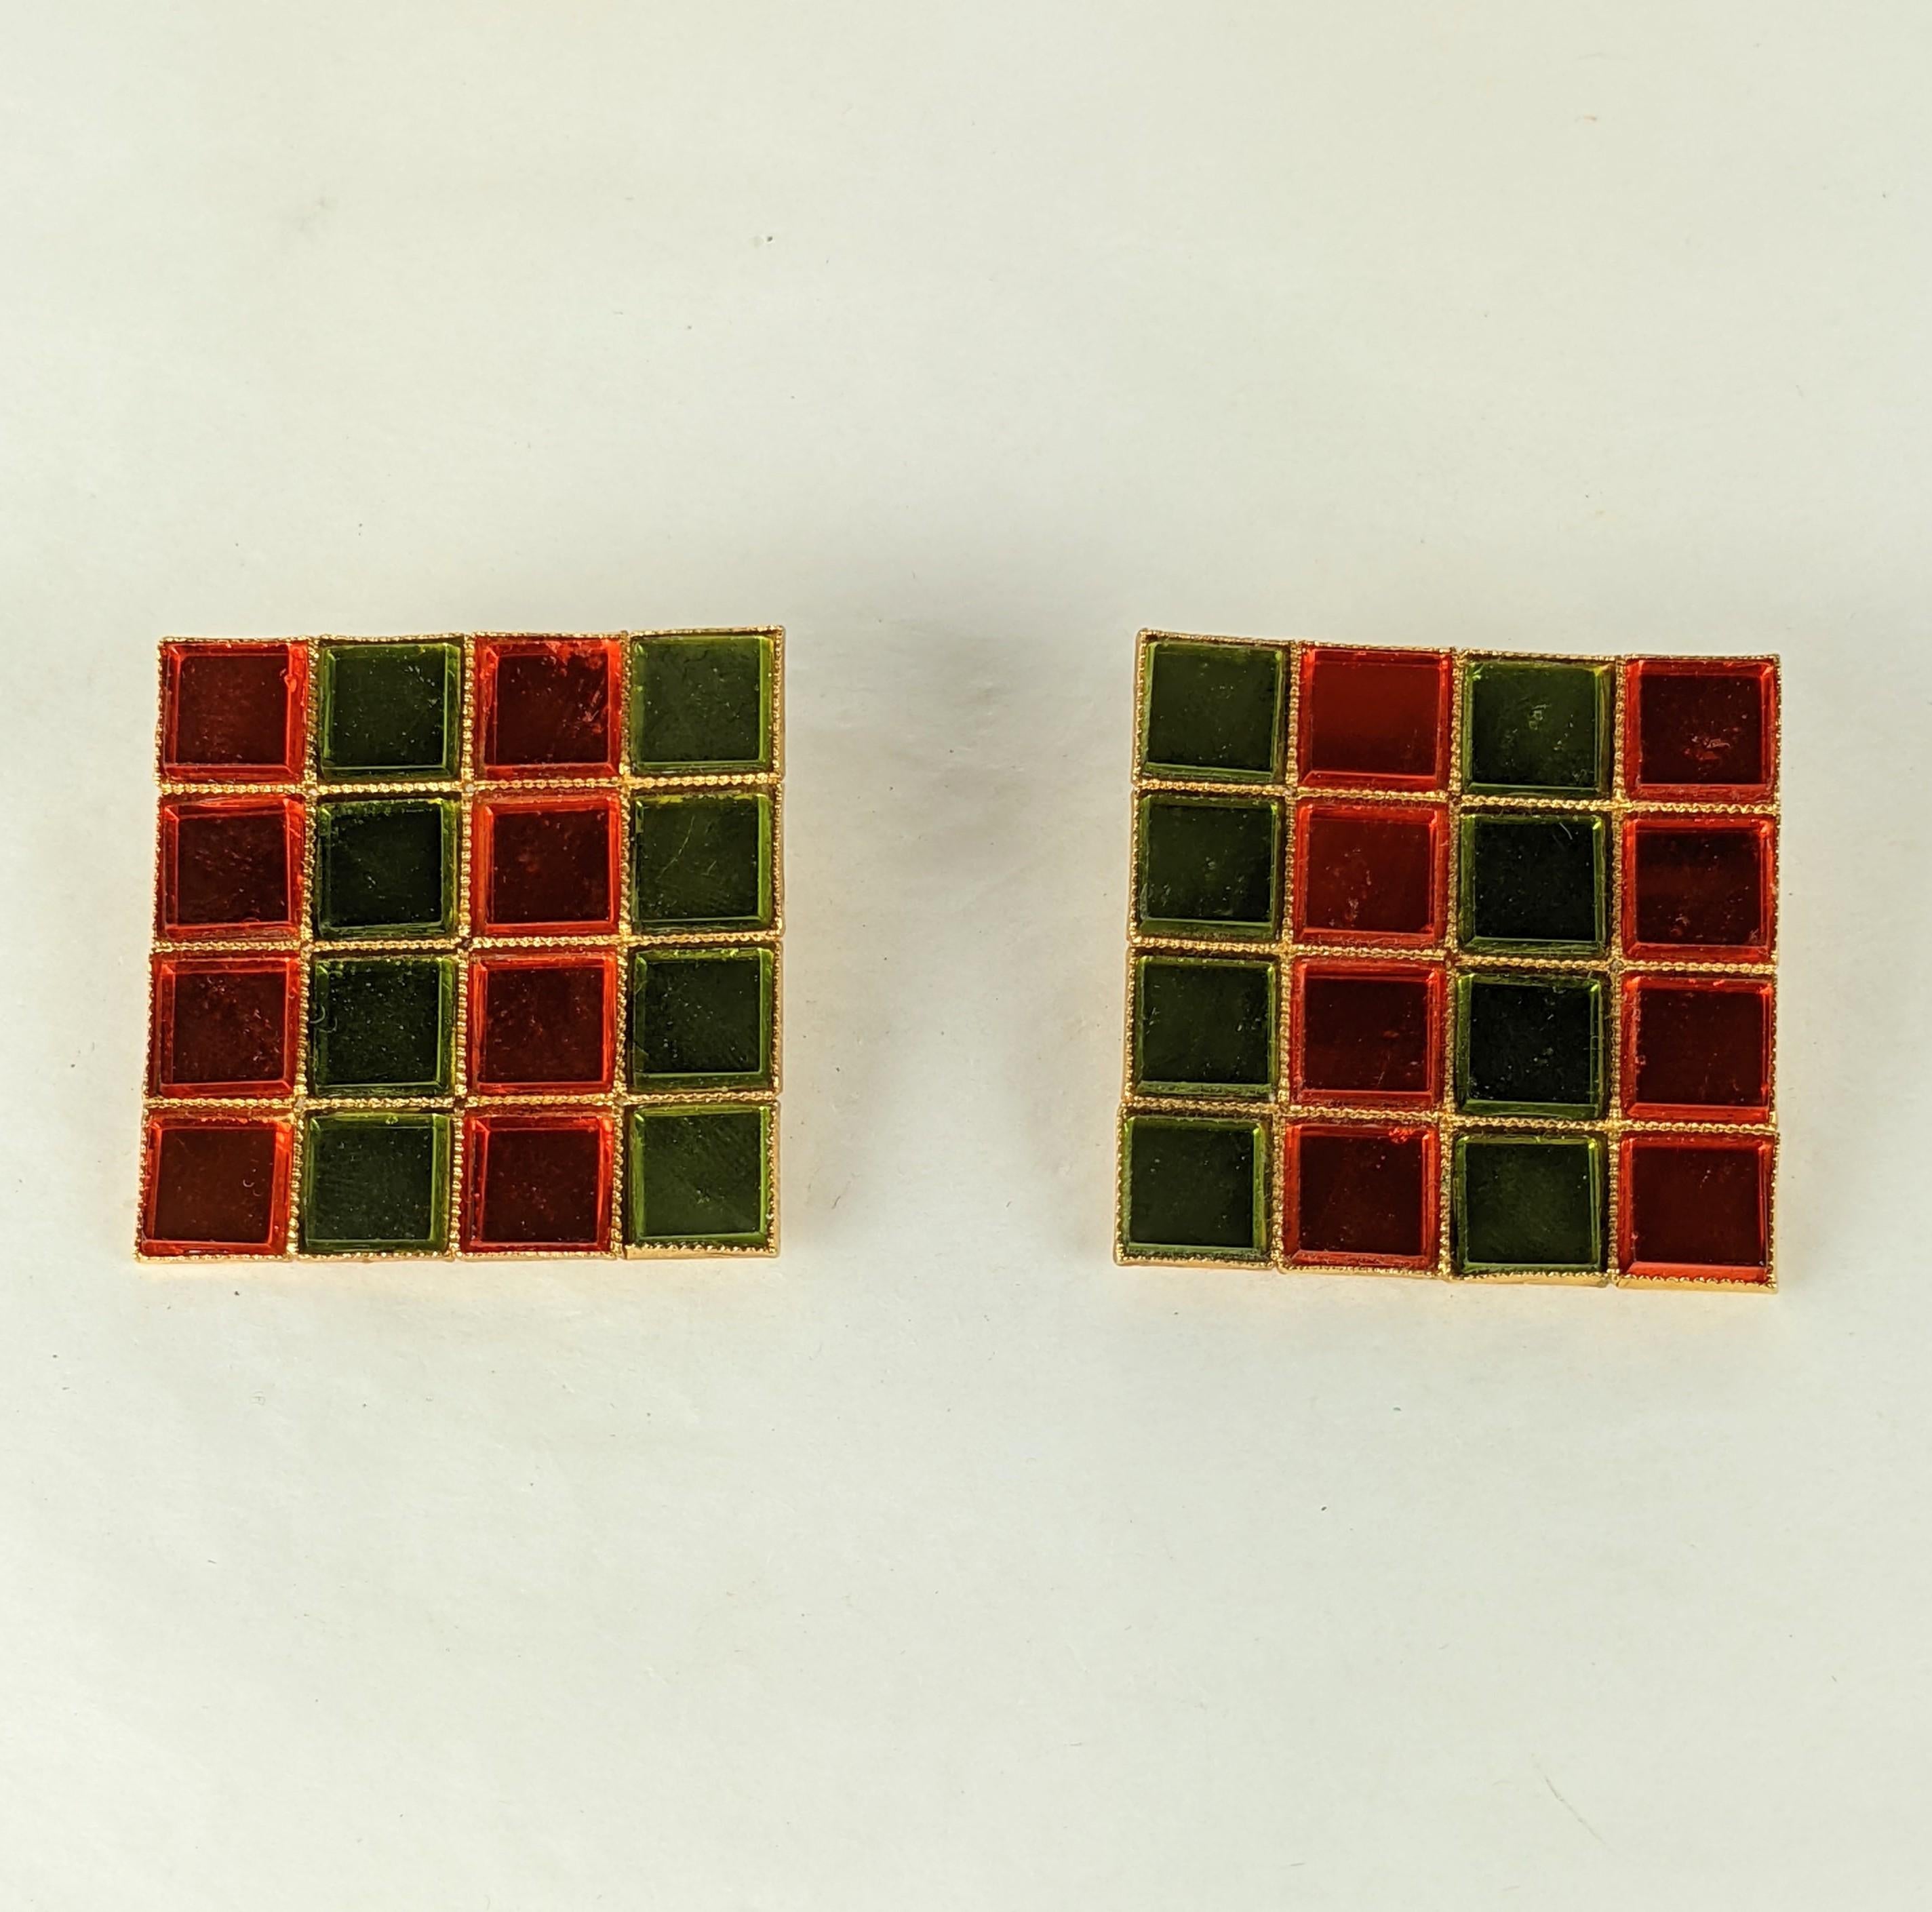 Yves Saint Laurent Mirror Tile Ear Clips In Excellent Condition For Sale In New York, NY